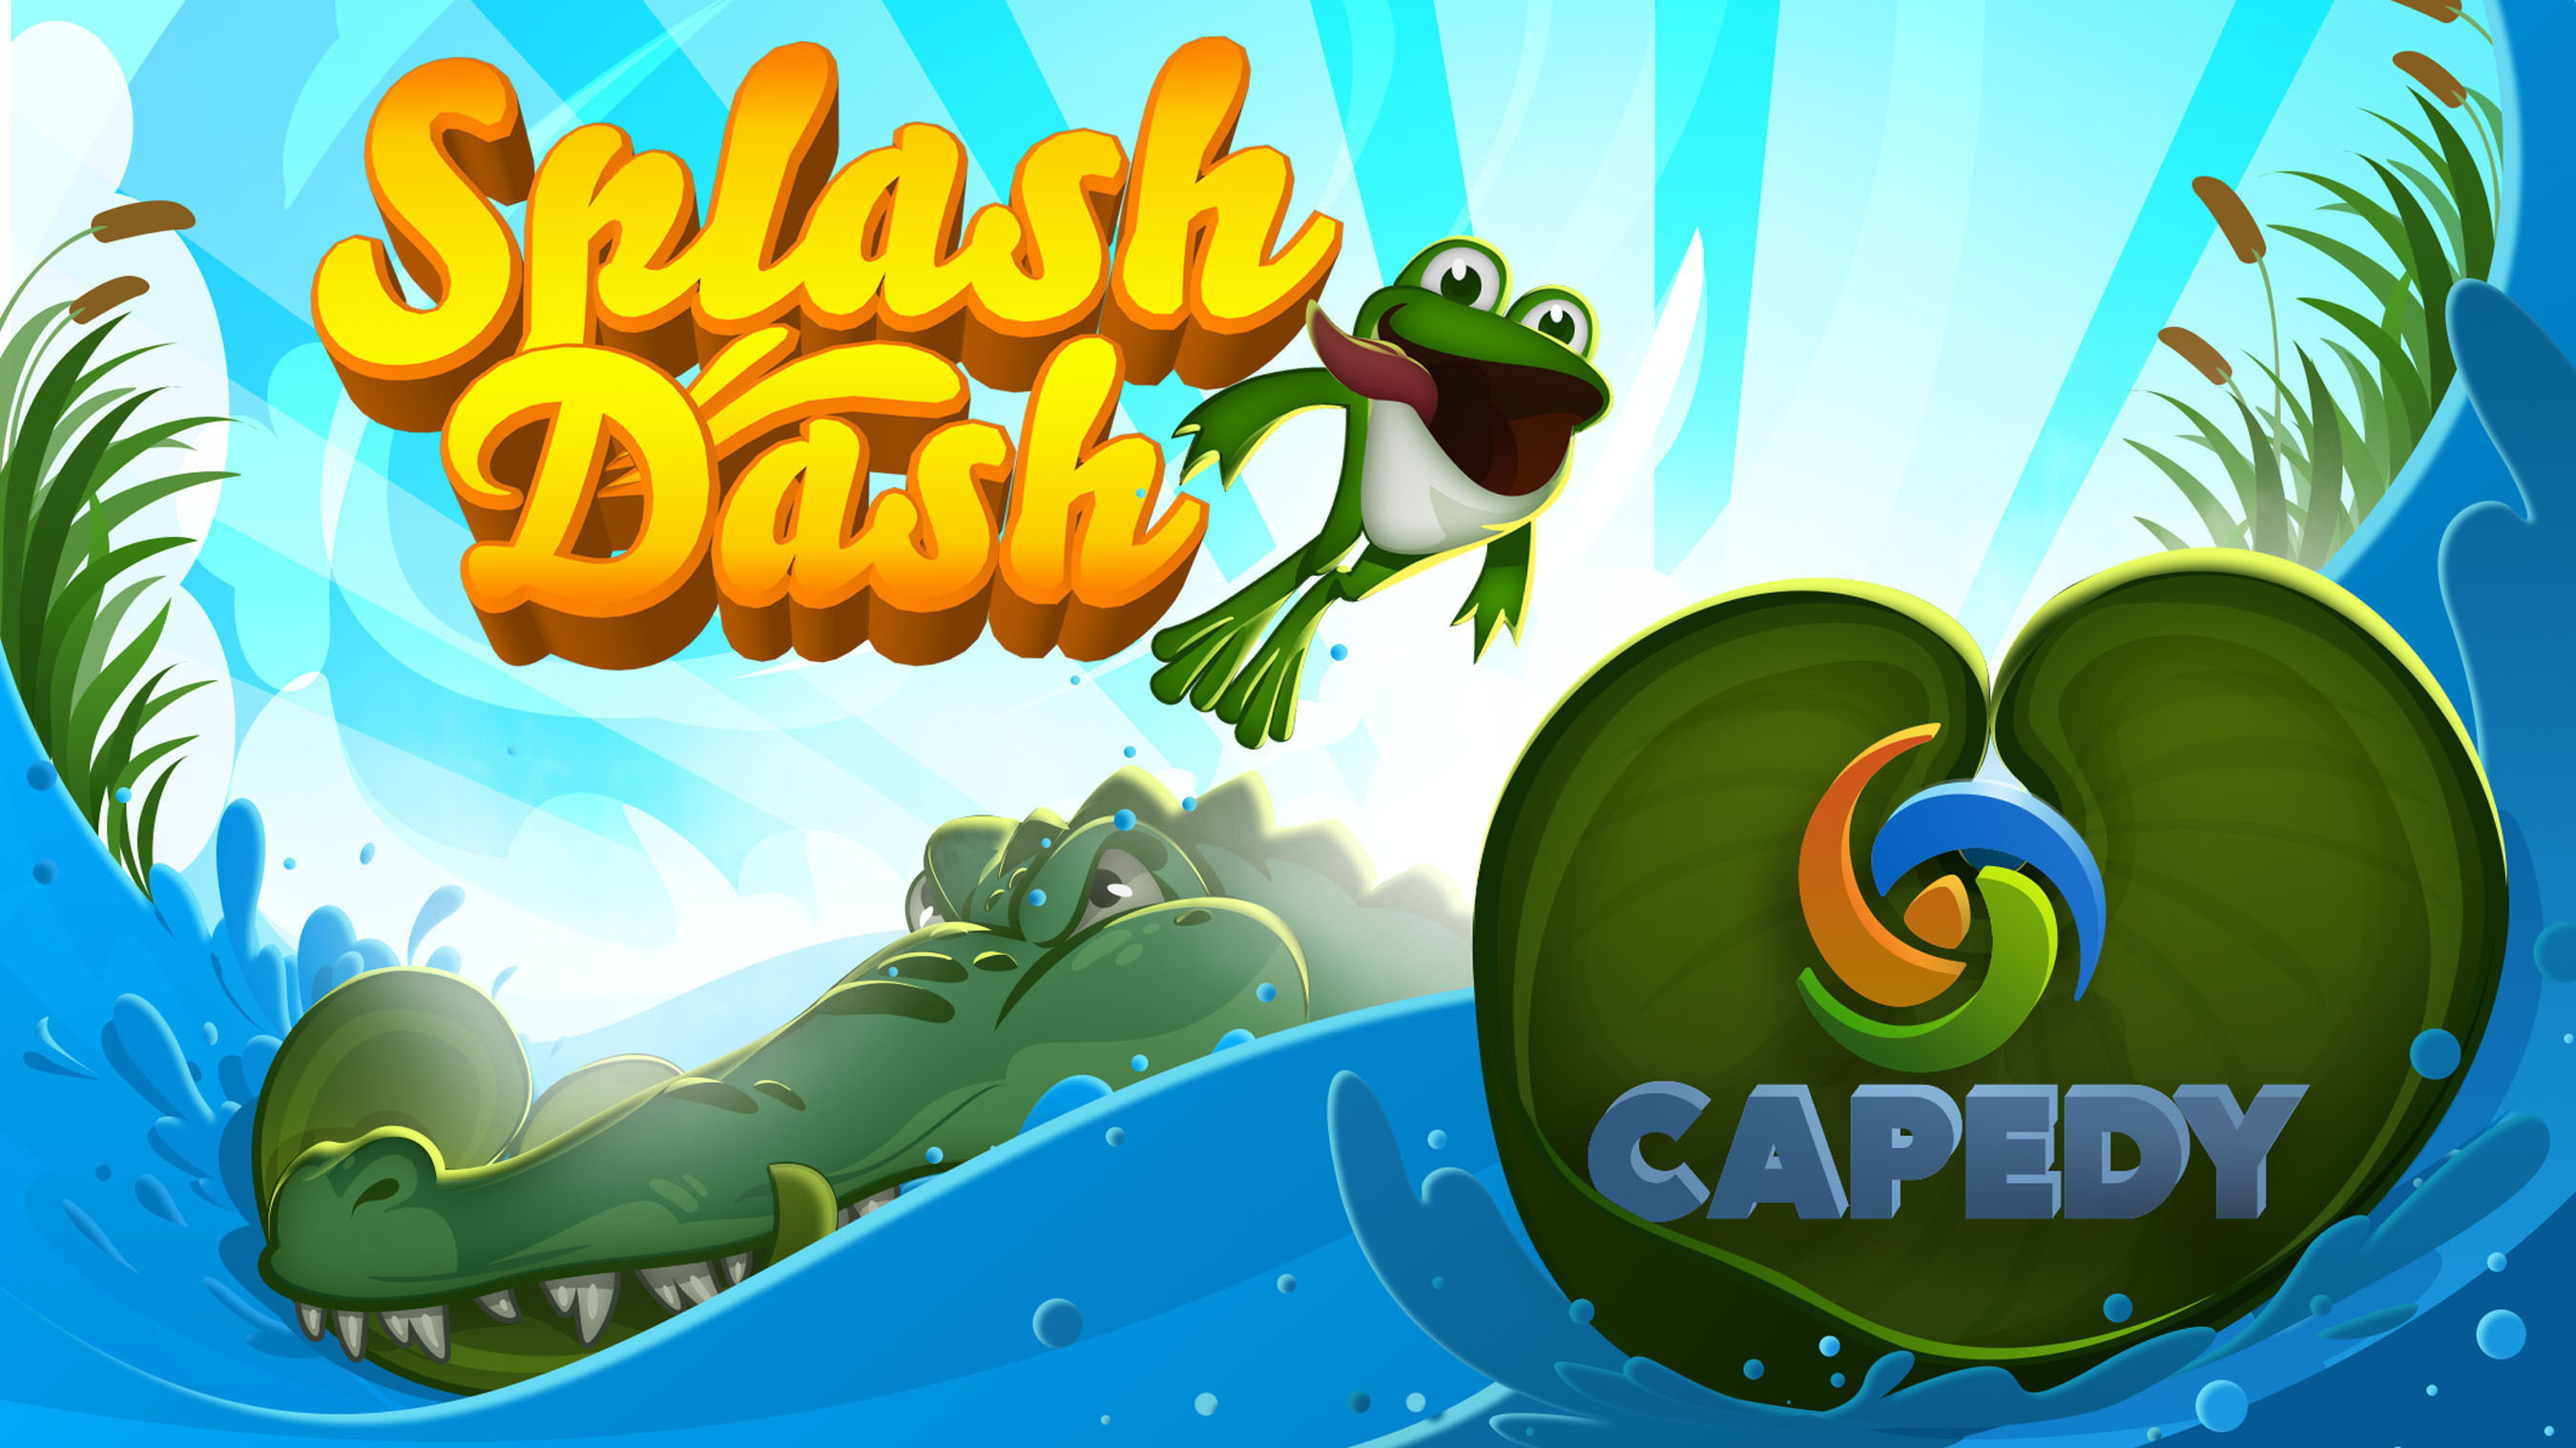 In the iOS game Splash Dash, you help Tad the frog jump upstream using lily pads, flowers, grasshoppers, turtles and more to avoid Clementine the Crocodile. With its bright and inviting graphics and whimsical music, Splash Dash is addictively fun. By simply tilting your device back and forth you can help Tad gather coins, bounce off bubbles, avoid crocodiles and take advantage of other friendly creatures to get as far upstream as he can. The game is simple, entertaining and even allows users to customize Tad with various colors and accessories.Please visit http://www.splashdashgame.com for more information. (PRNewsFoto/Capedy LLC) (PRNewsFoto/CAPEDY LLC)